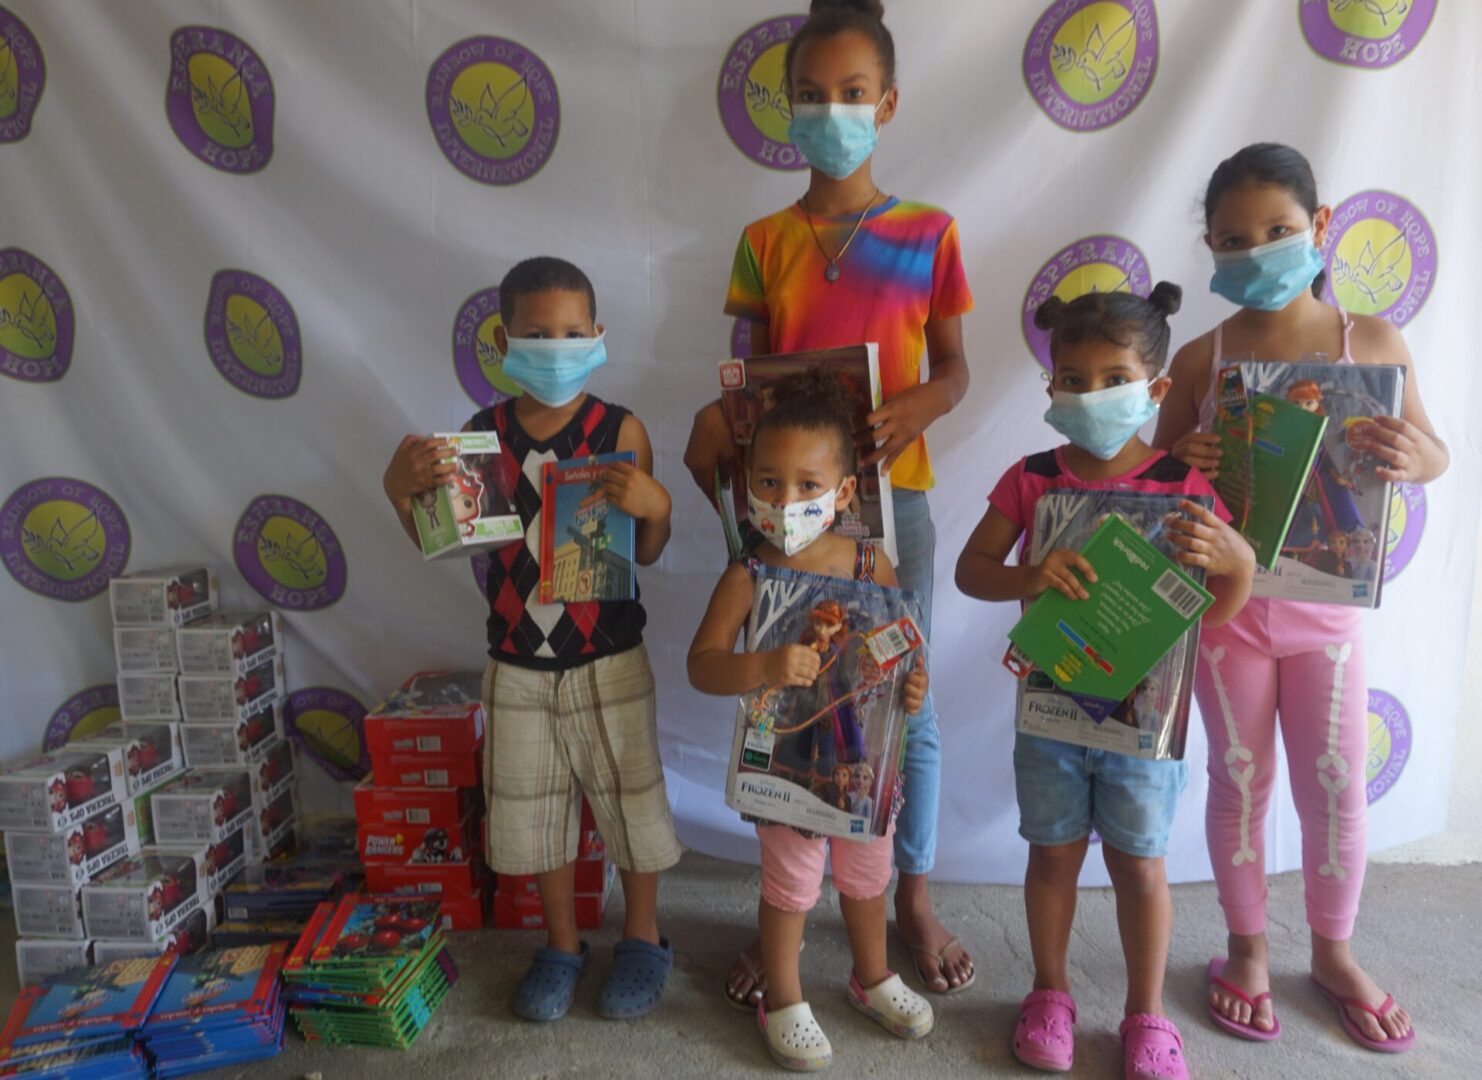 Five children standing against the Esperanza-Hope backdrop with their toys and books, batch 2